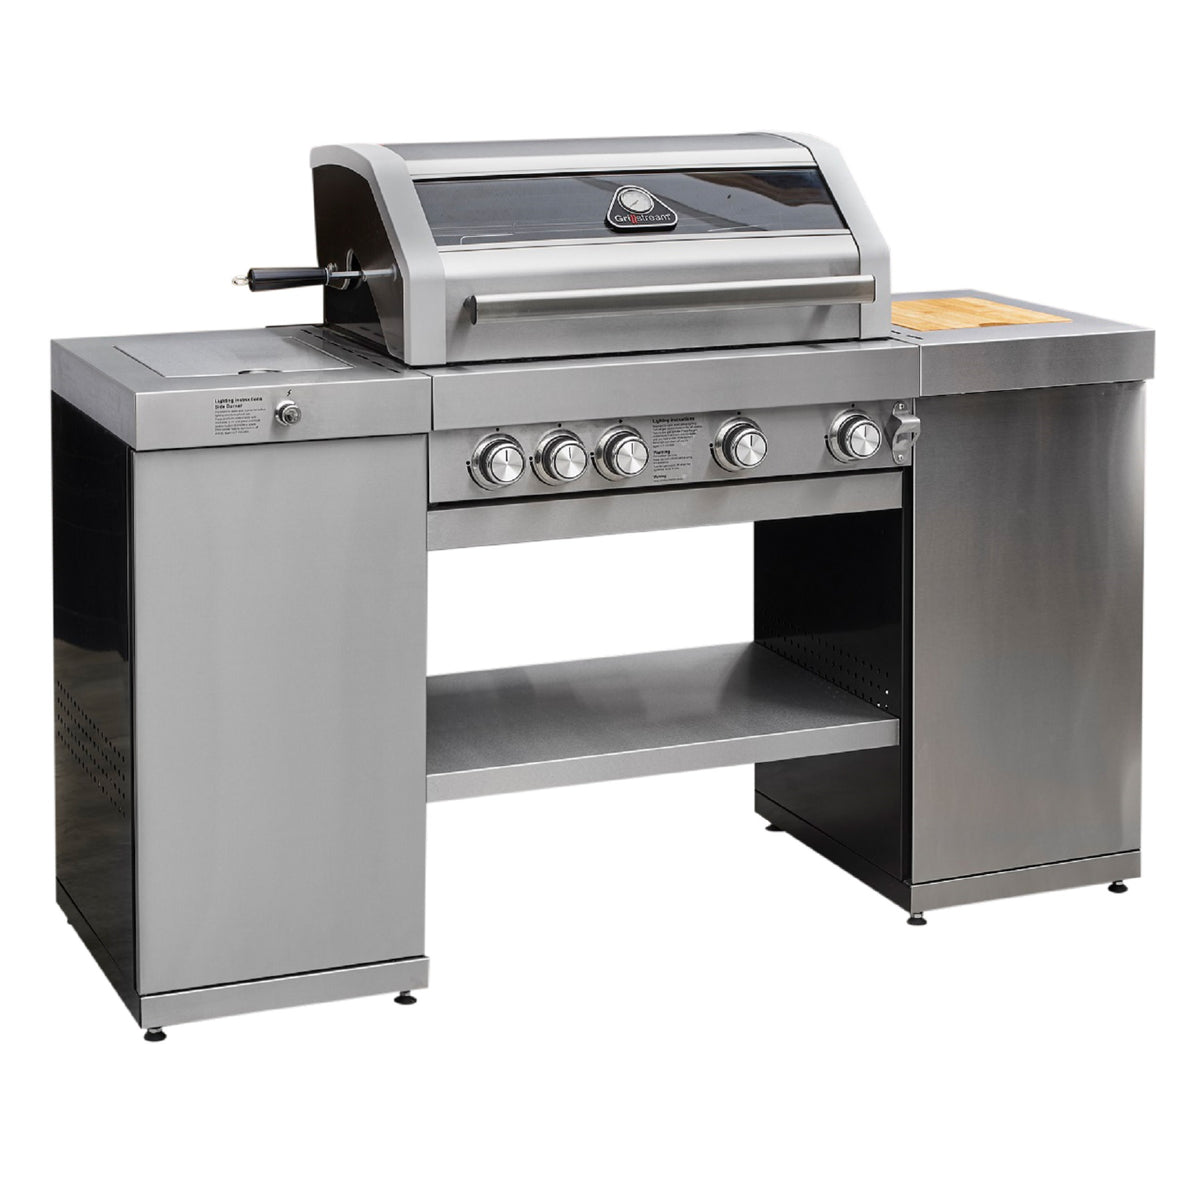 Grillstream Gourmet 4 Burner Island Hybrid Gas and Charcoal Barbecue - Stainless Steel